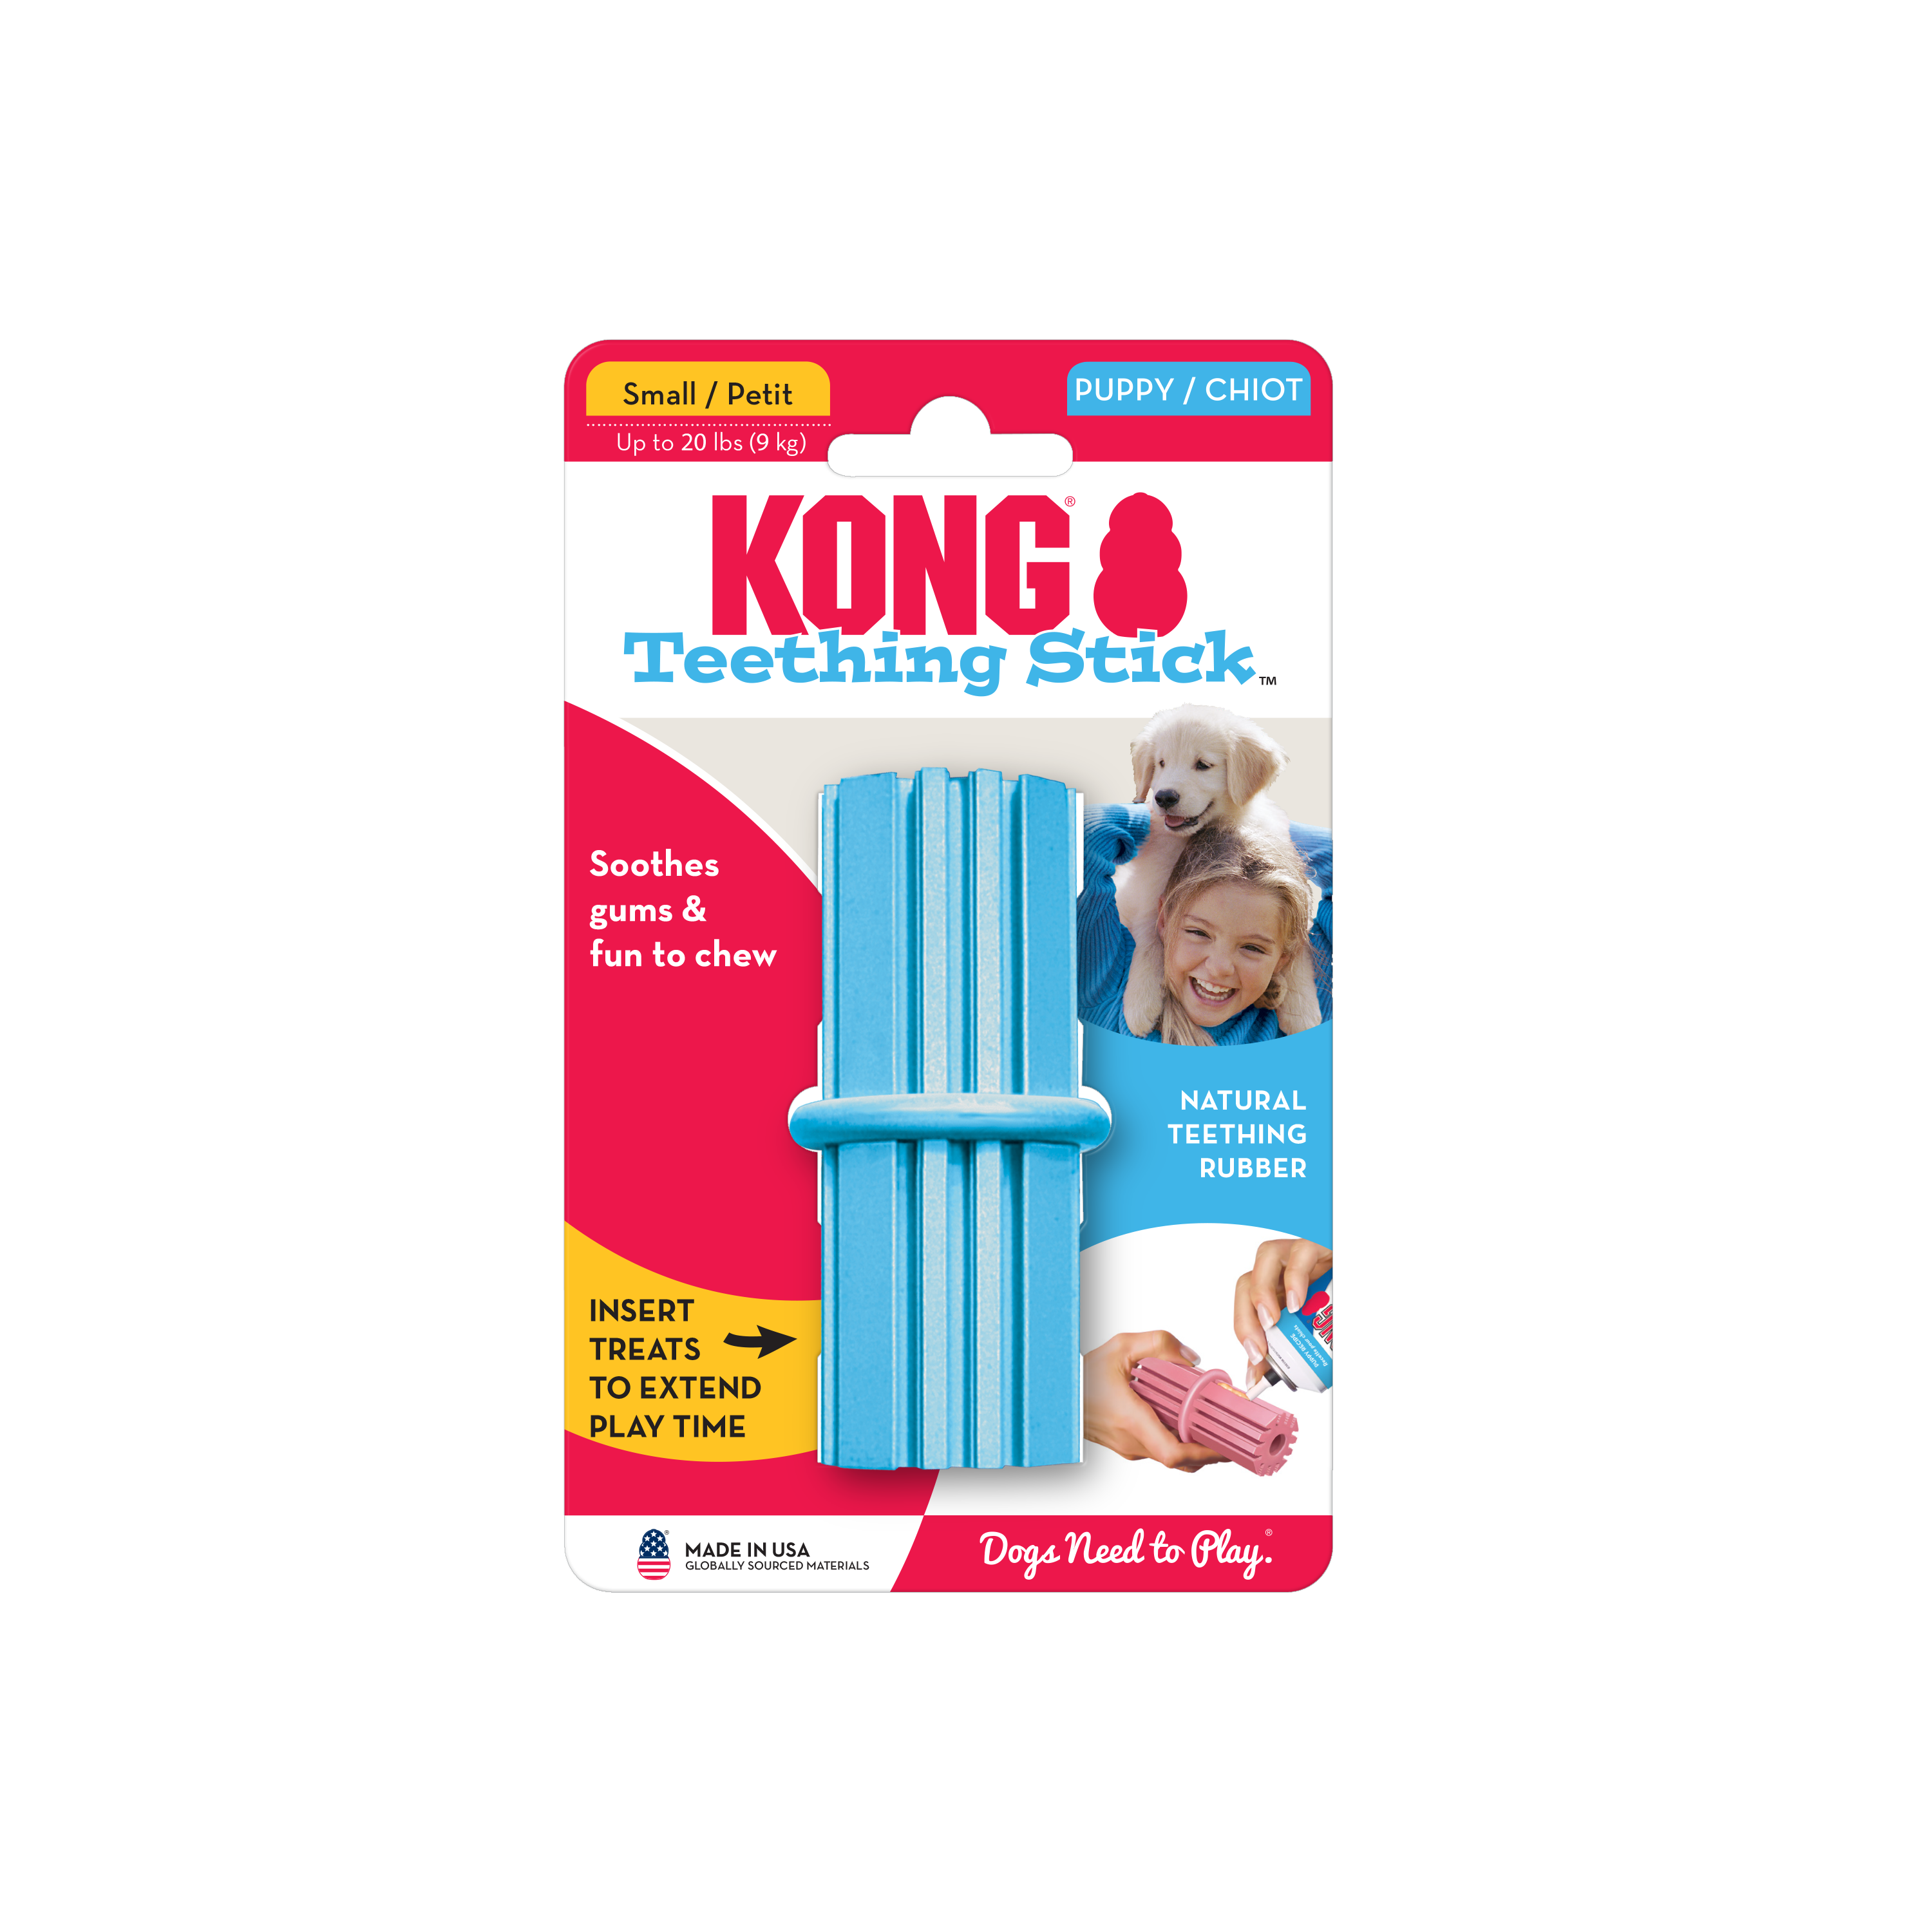 KONG Puppy Teething Stick onpack imagen de producto